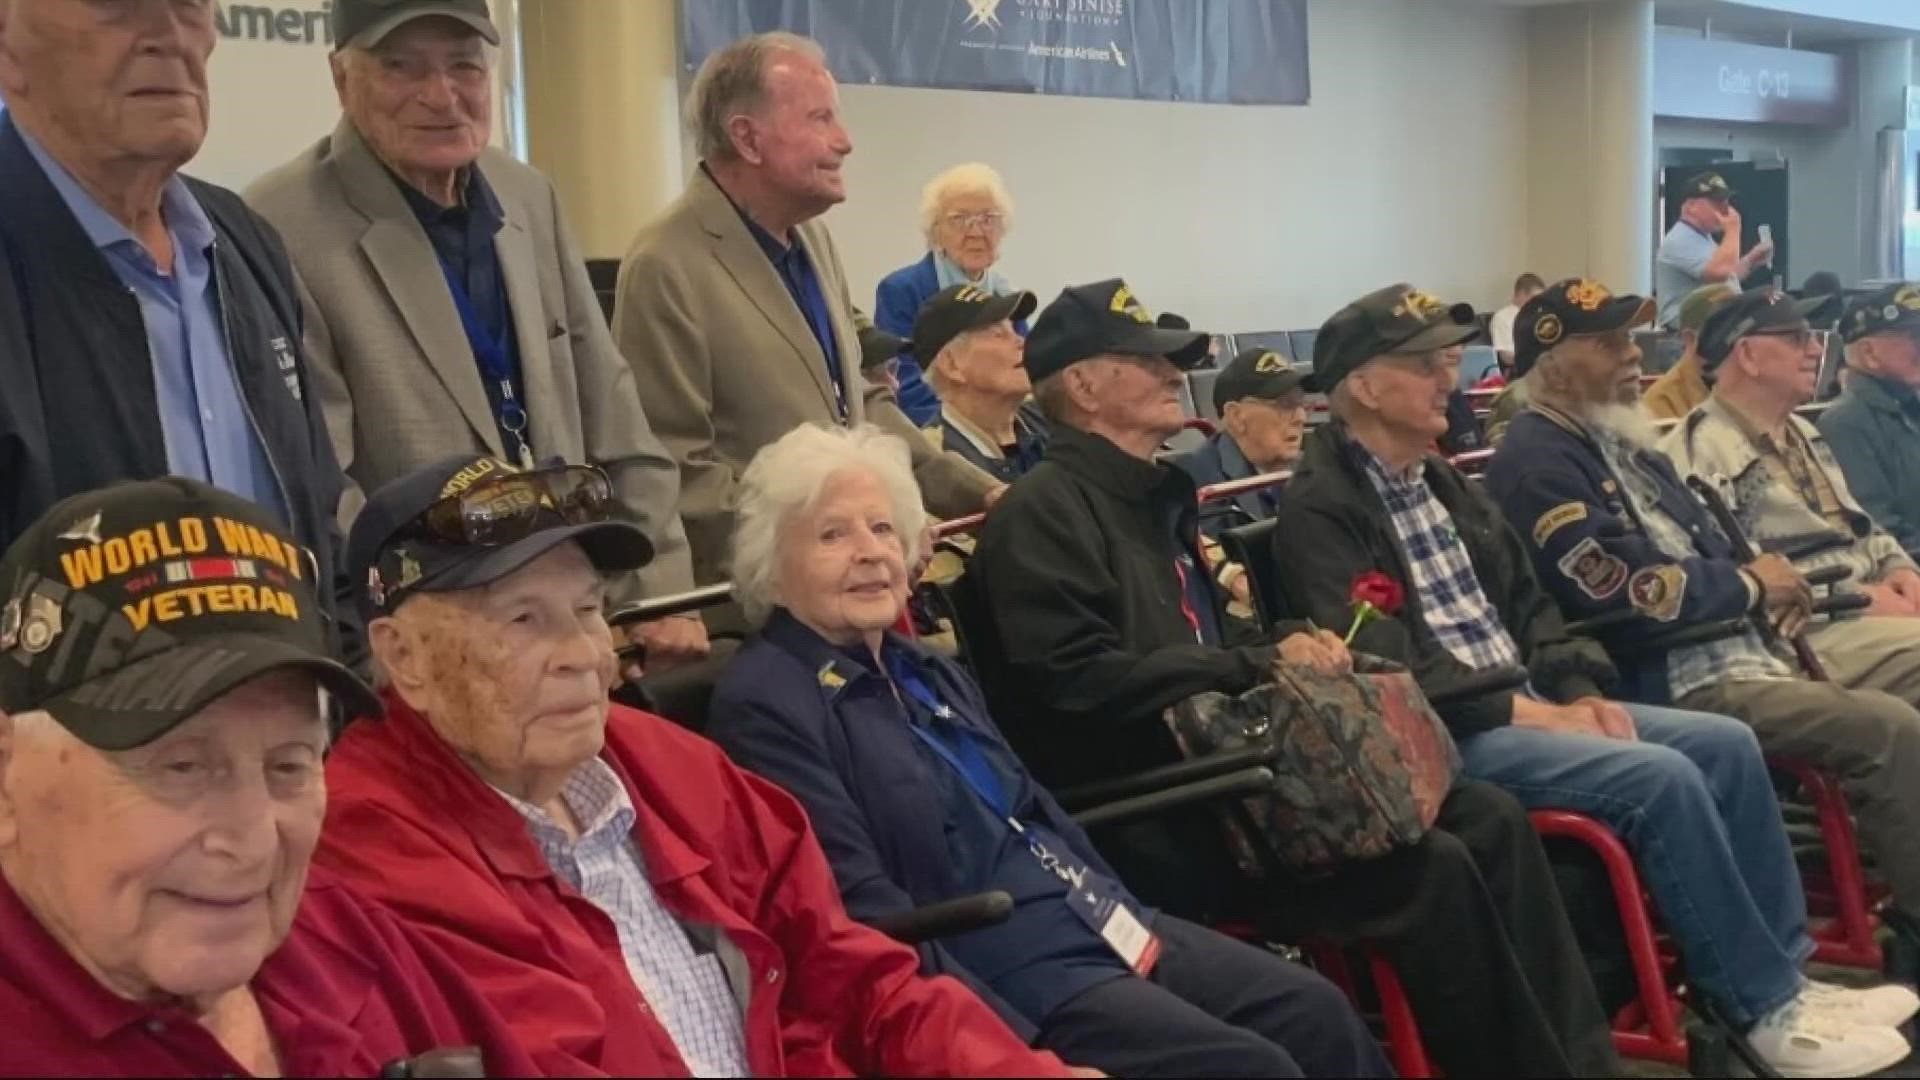 Jessie Dunbar was one of nine veterans to be honored at the grand opening of a new movie at The National WWII Museum in New Orleans on Veterans Day.